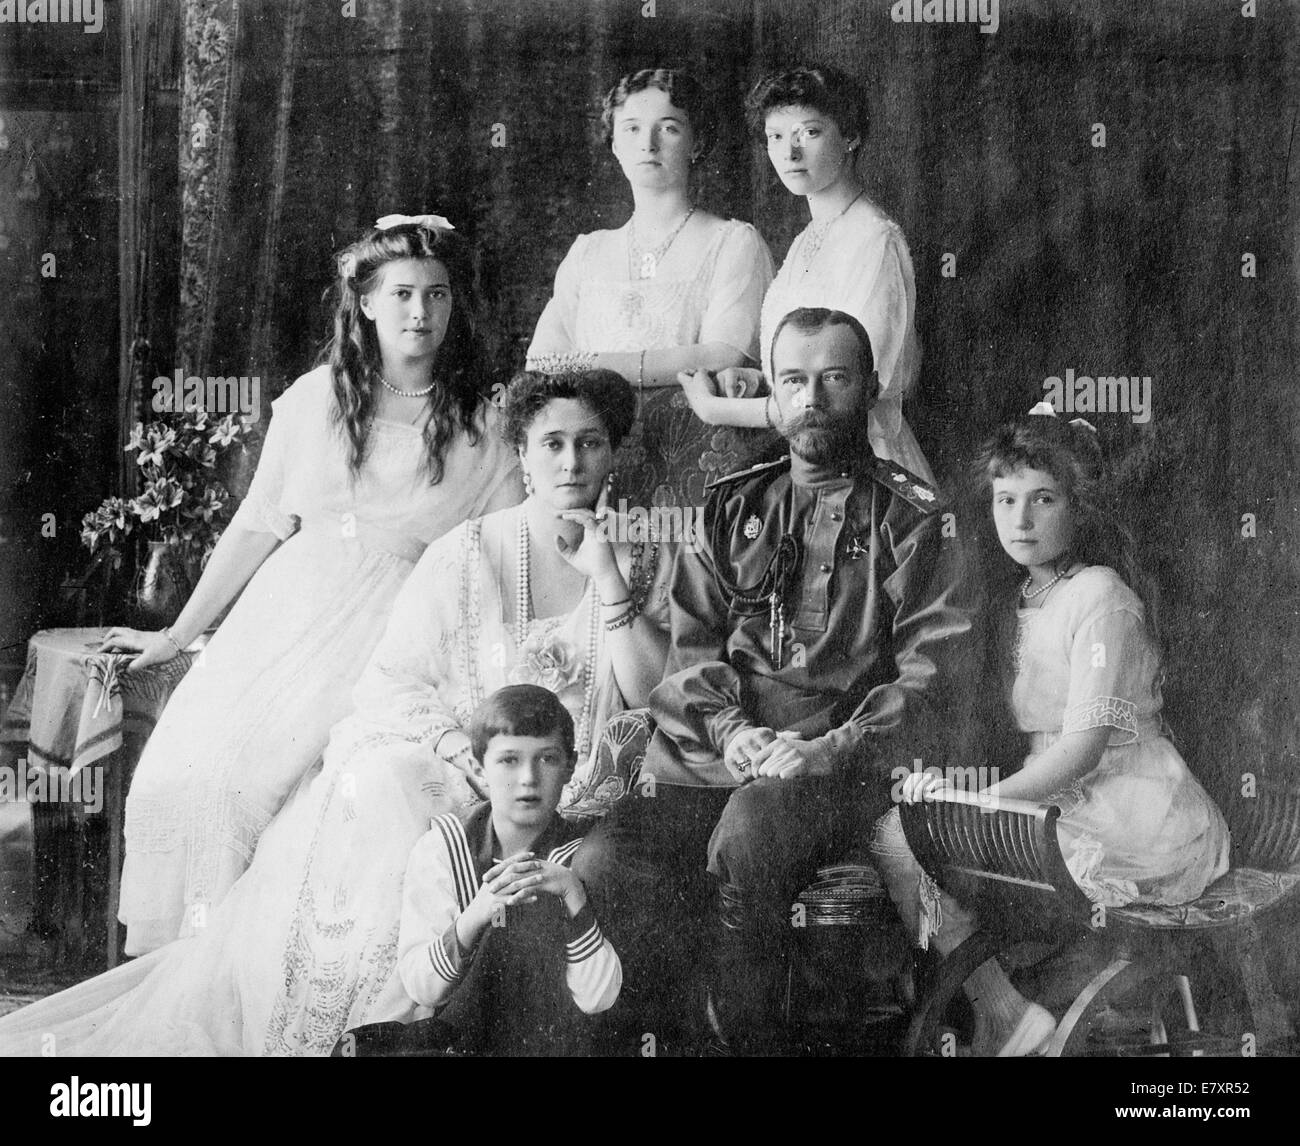 Royal Russian family - members of the Romanovs, the last royal family of Russia including: seated (left to right) Marie, Queen Alexandra, Czar Nicholas II, Anastasia, Alexei (front), and standing (left to right), Olga and Tatiana, circa 1914 Stock Photo